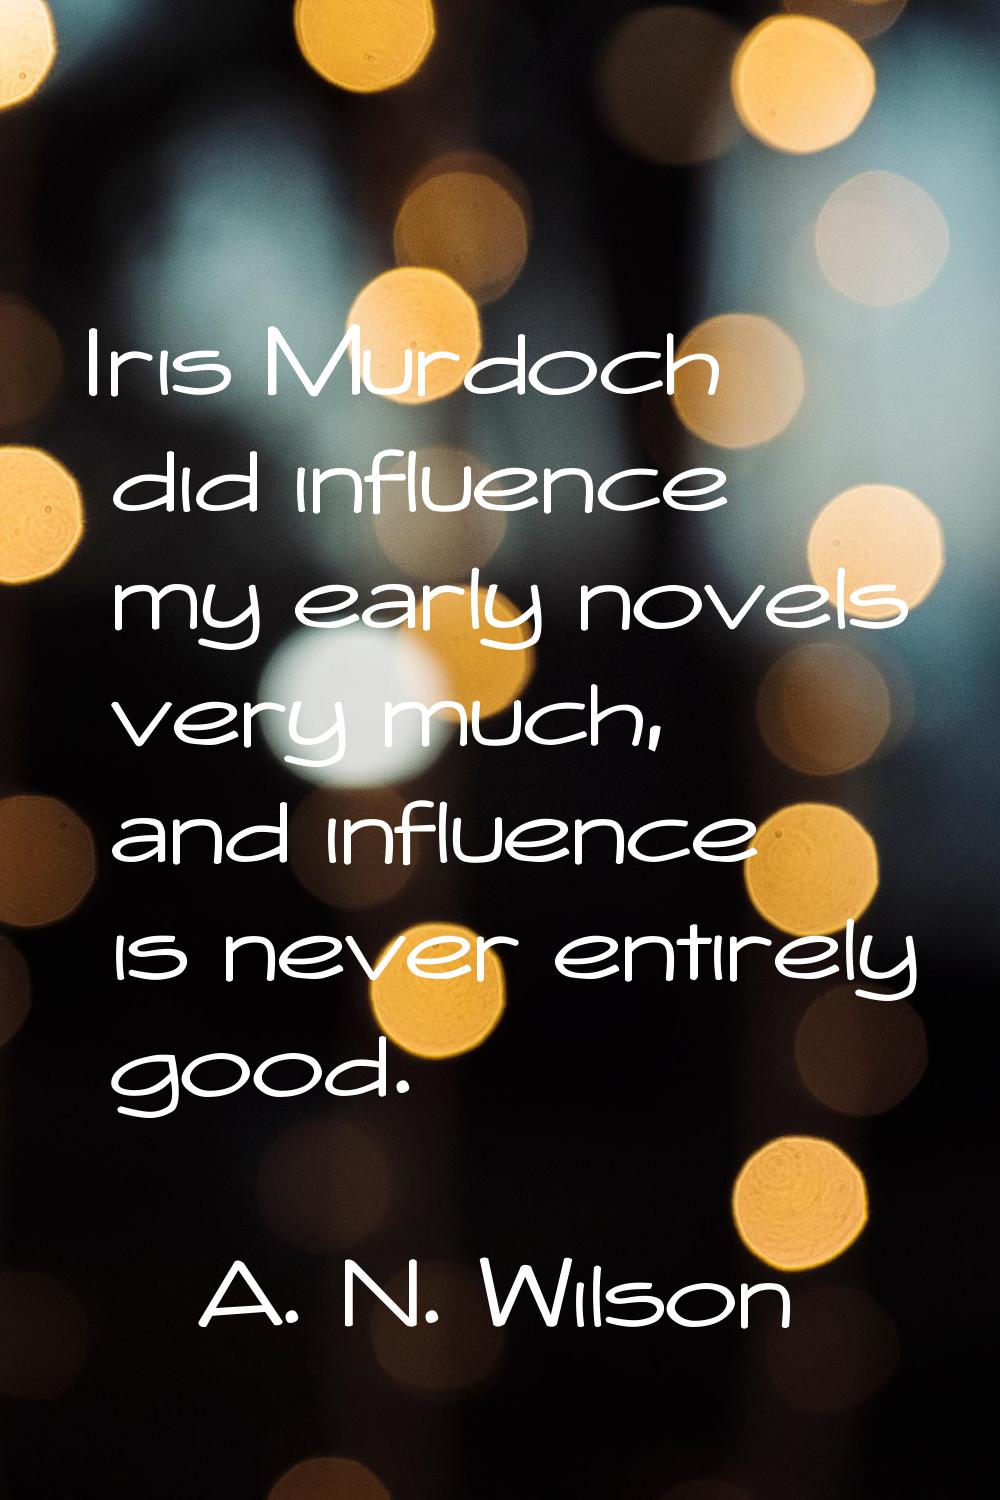 Iris Murdoch did influence my early novels very much, and influence is never entirely good.